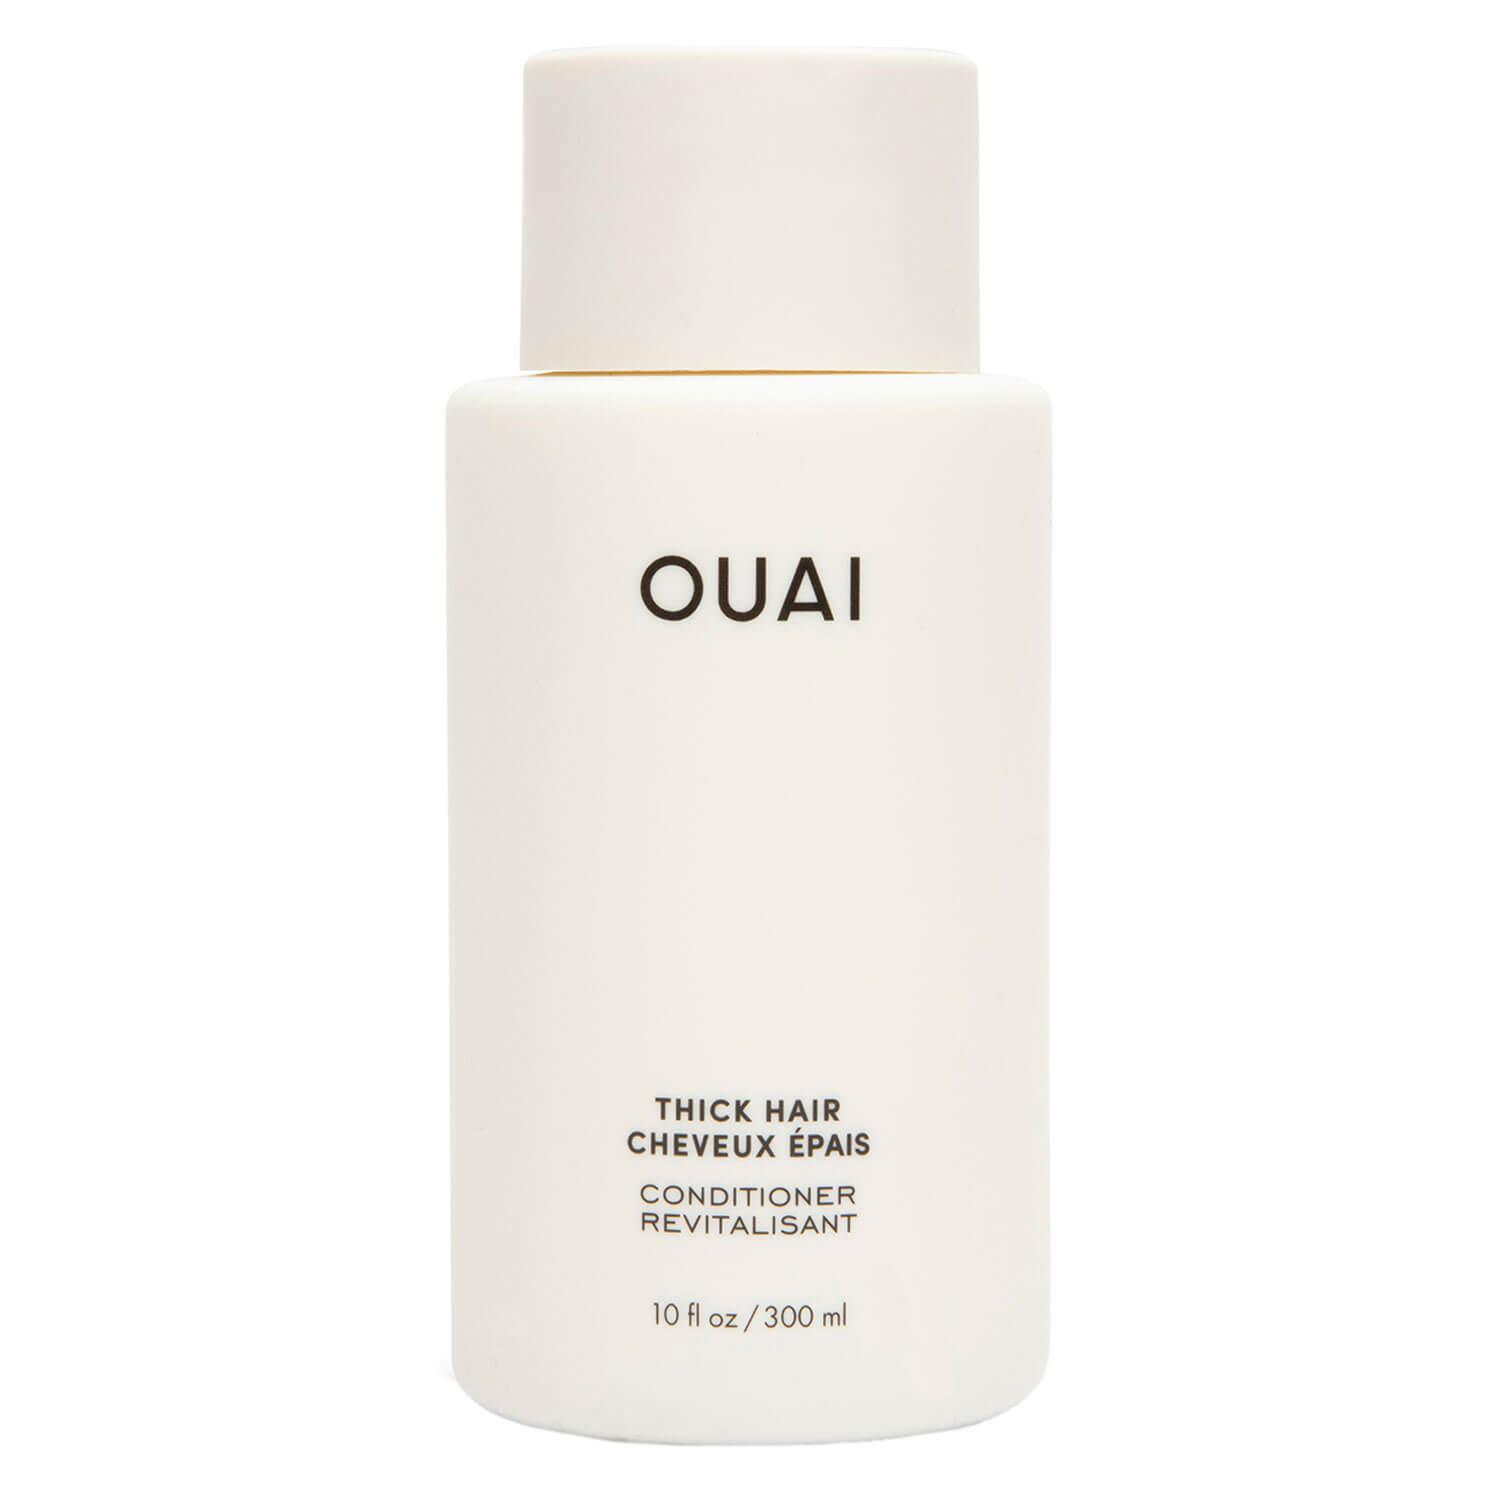 OUAI - Thick Hair Conditioner